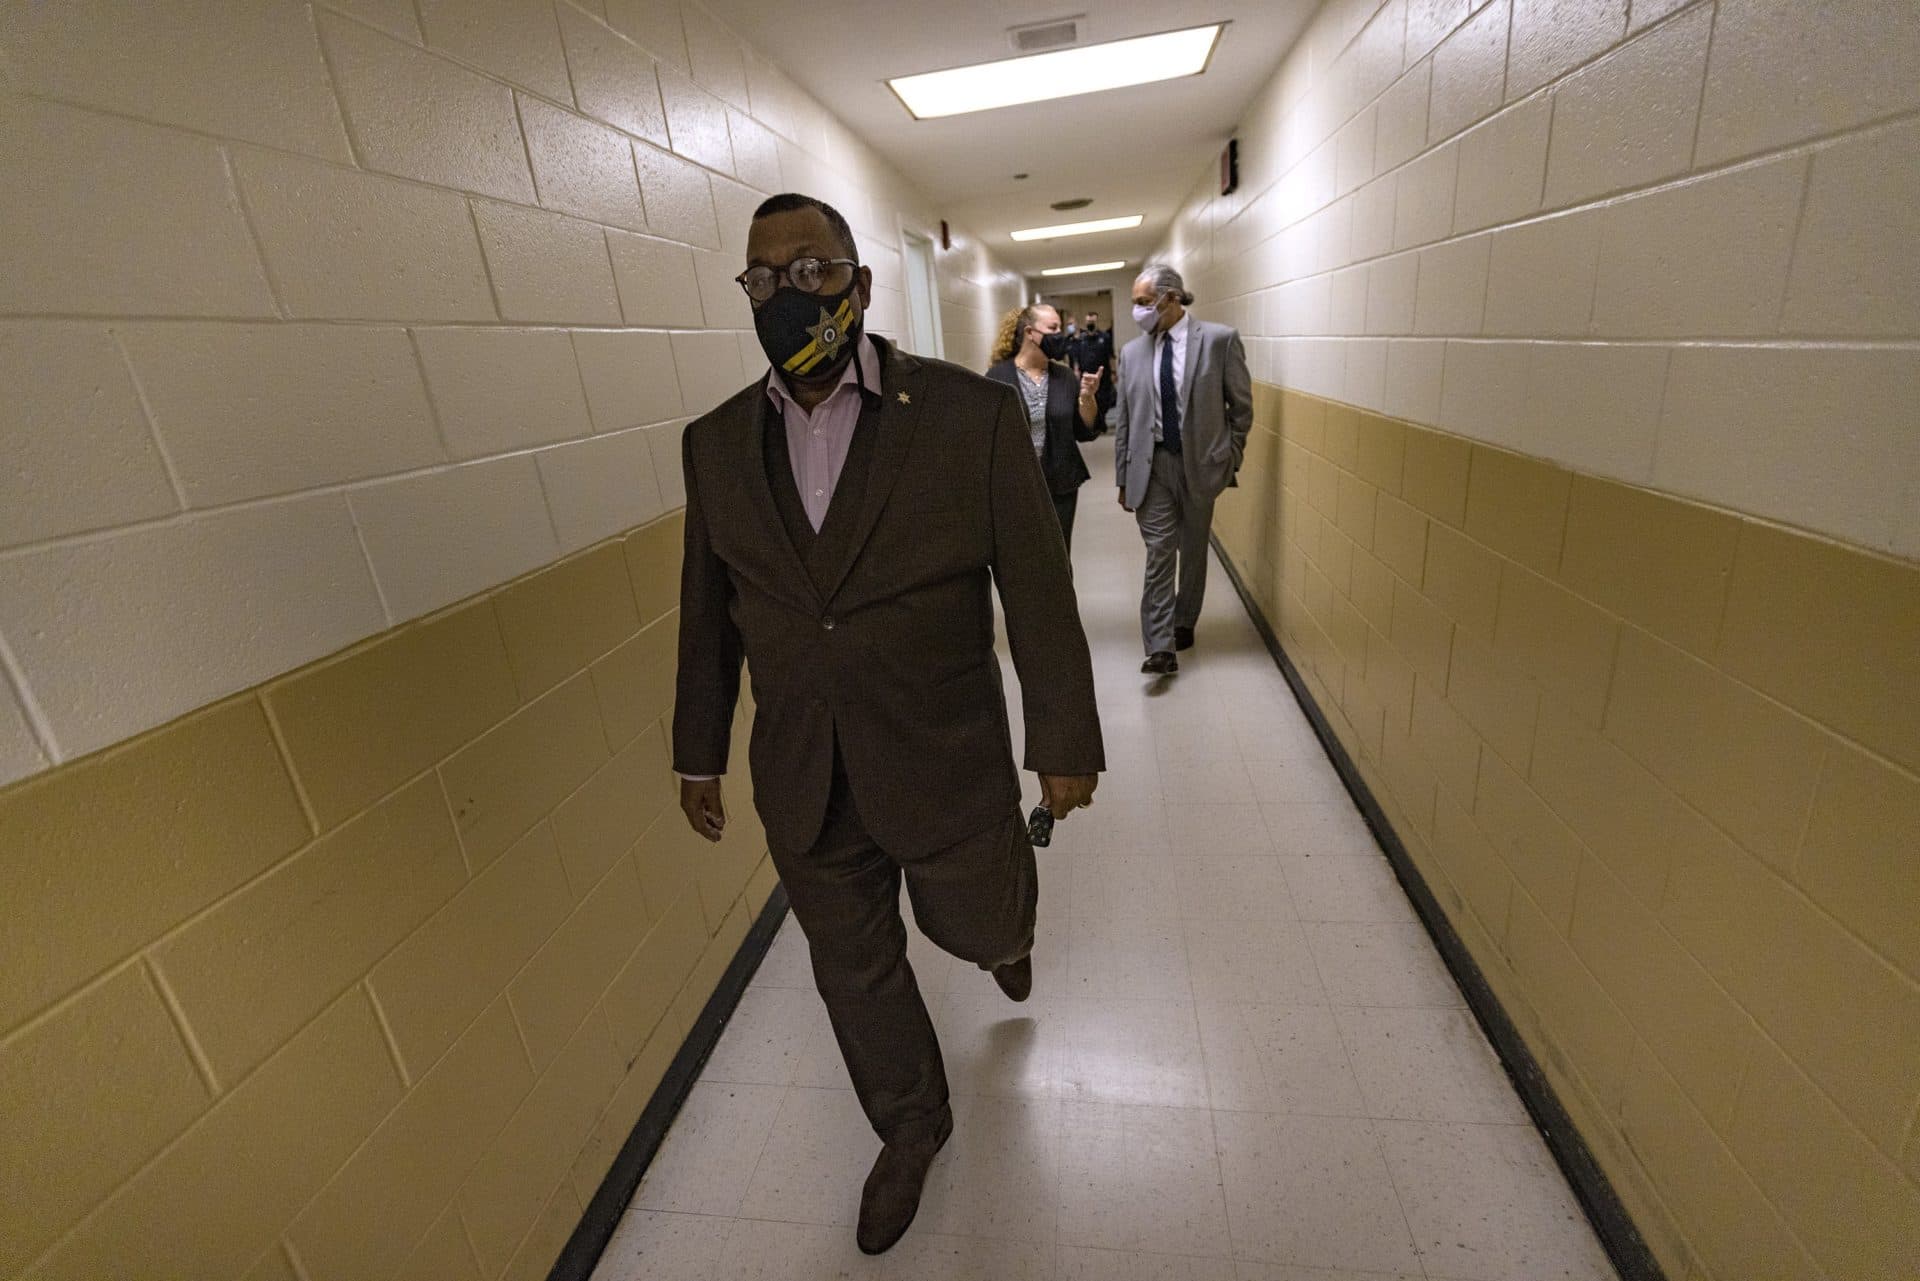 Sheriff Steven Tompkins walks through a hallway of the Suffolk County jail during a tour of the facility. (Jesse Costa/WBUR)